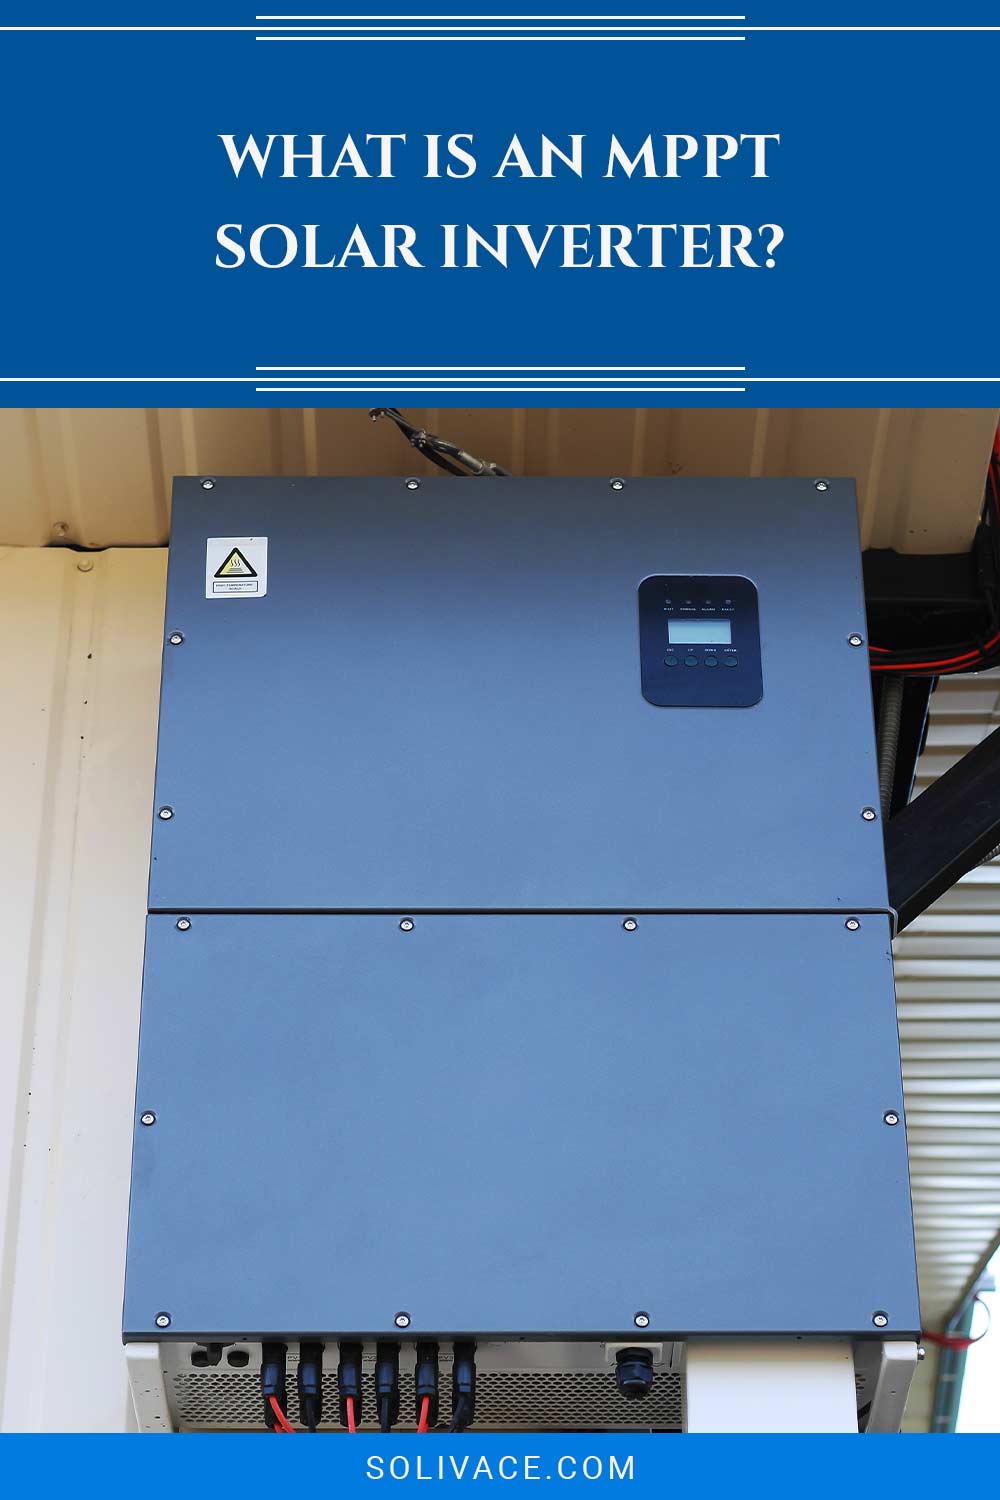 What is an MPPT Solar Inverter?